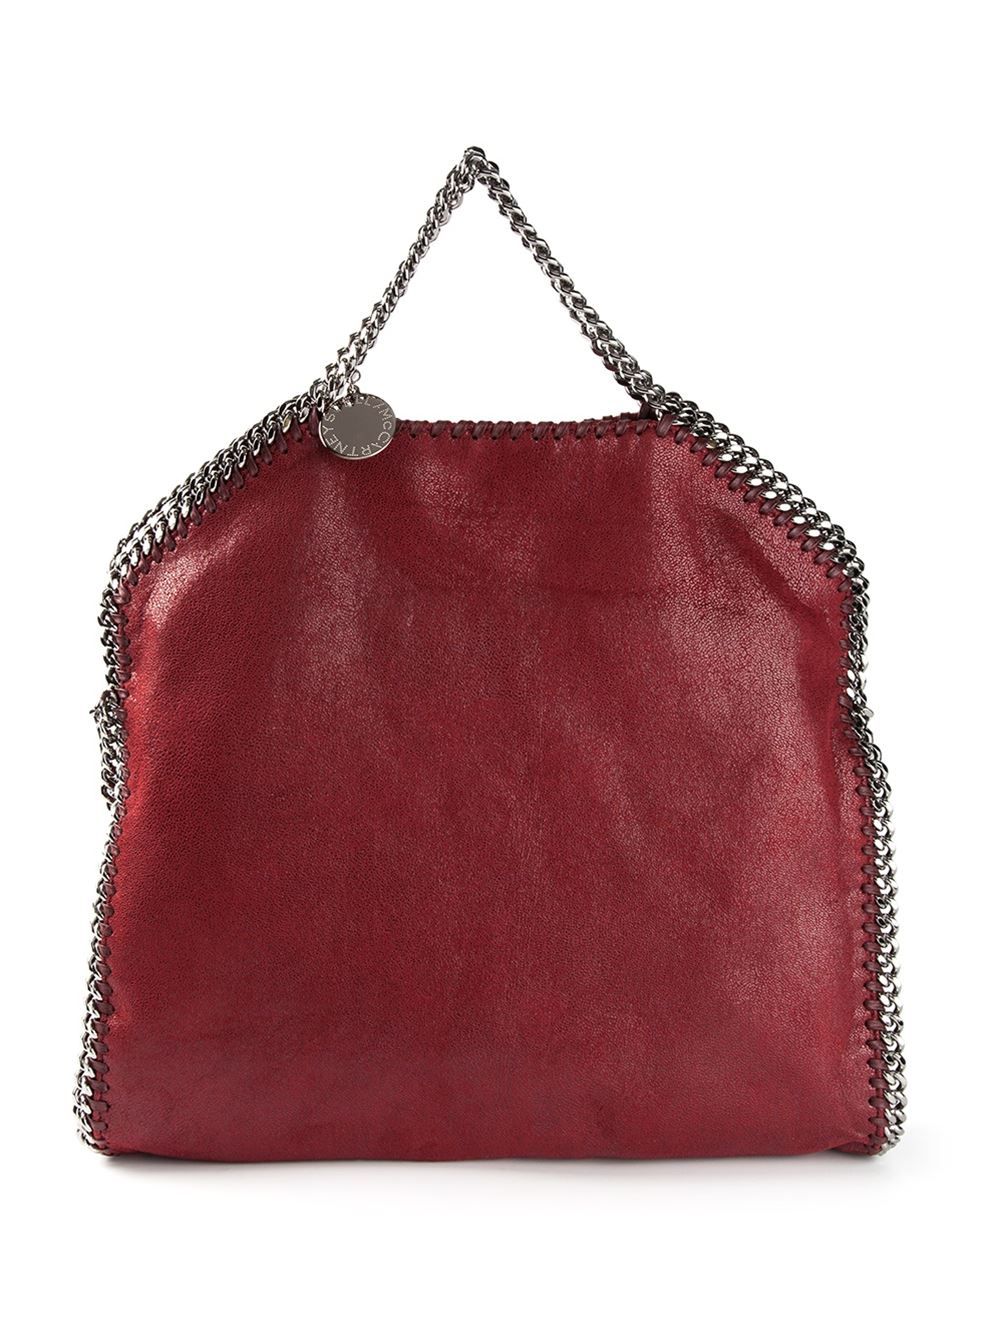 Lyst - Stella Mccartney 'falabella Shaggy Deer' Fold Over Tote in Red